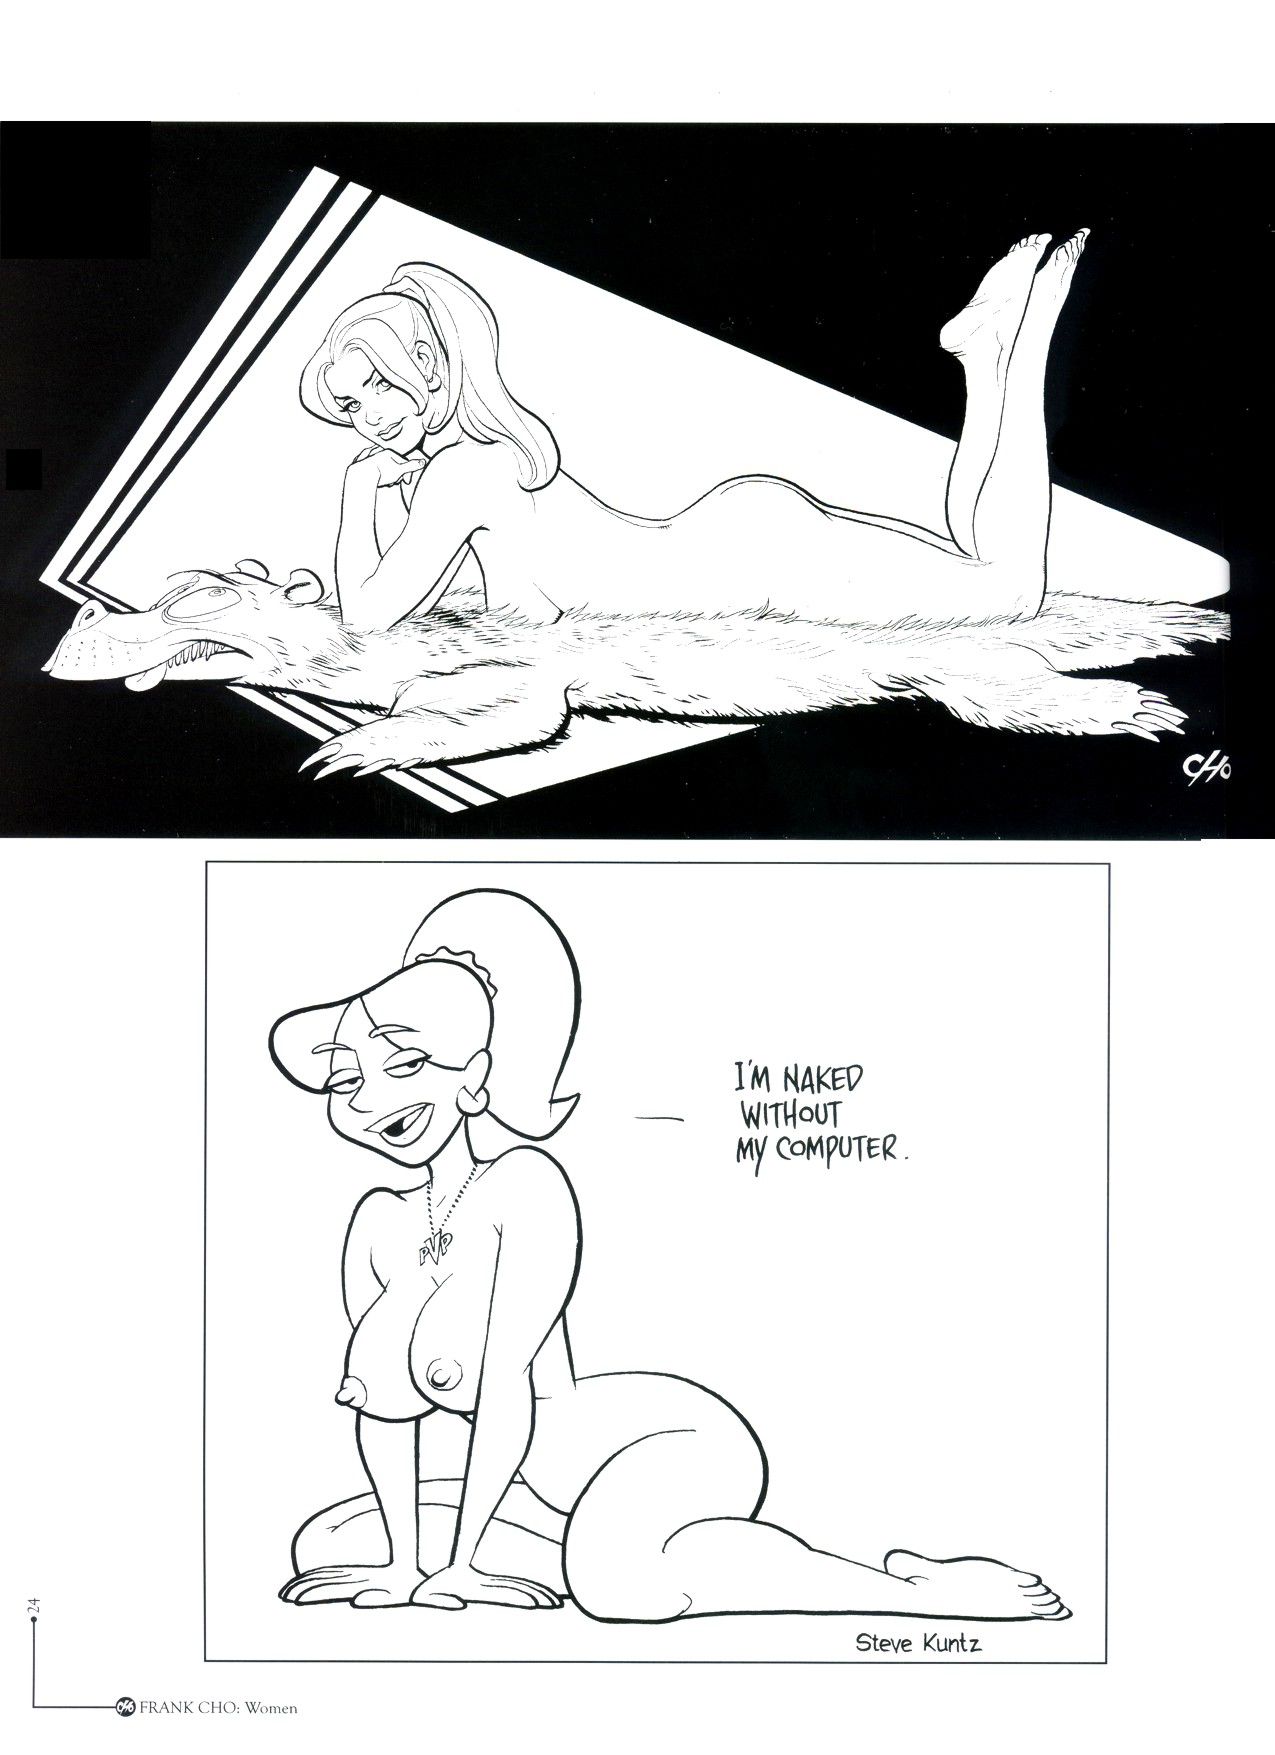 [Frank Cho] Women - Selected Drawings and Illustrations 25